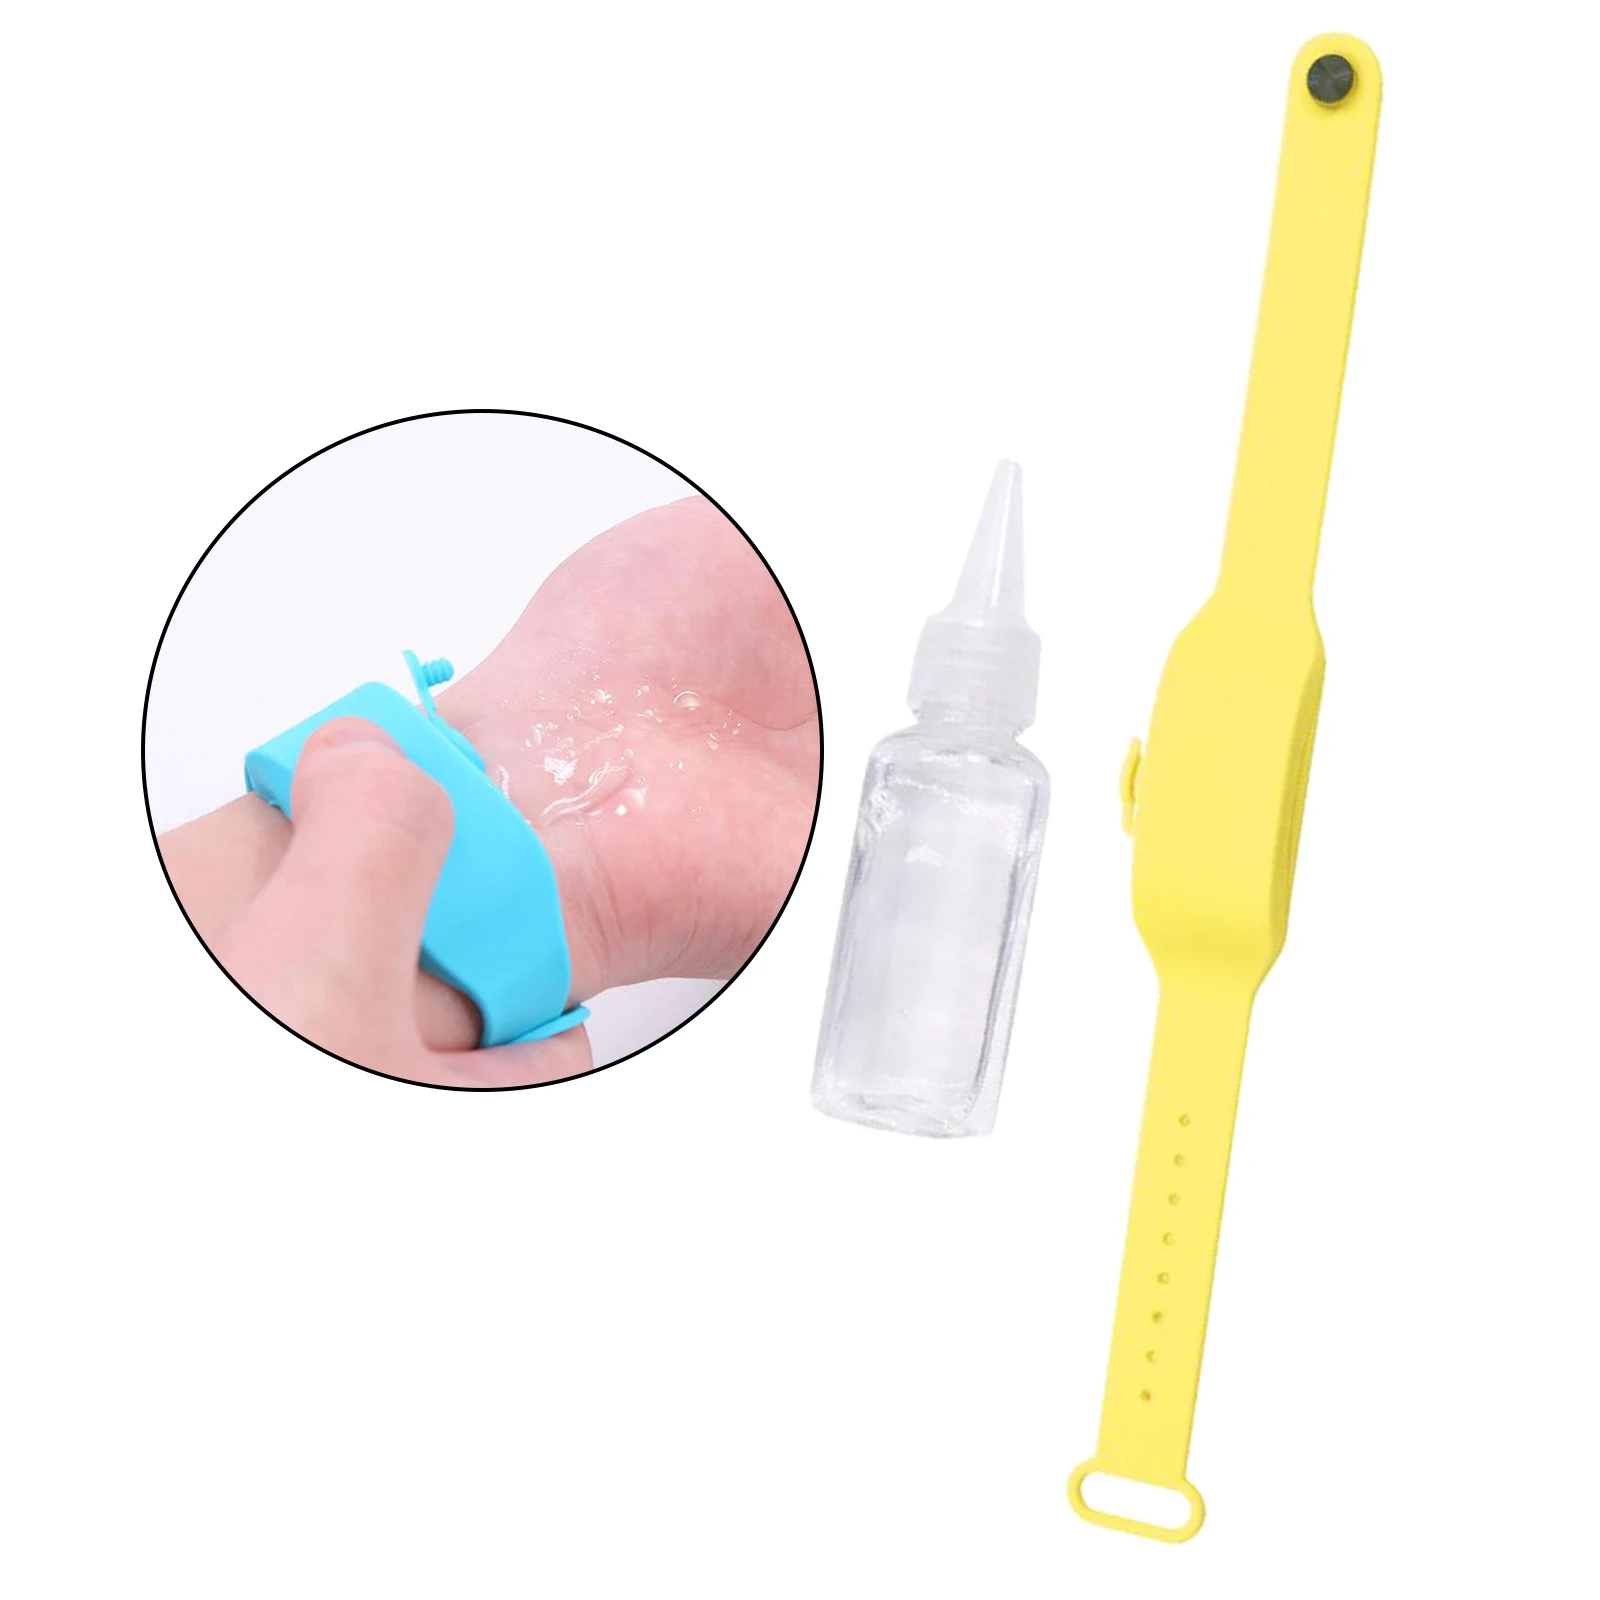 Silicone Soap Bracelet Wristband Hand Disinfectant Dispenser Band Watch Wash